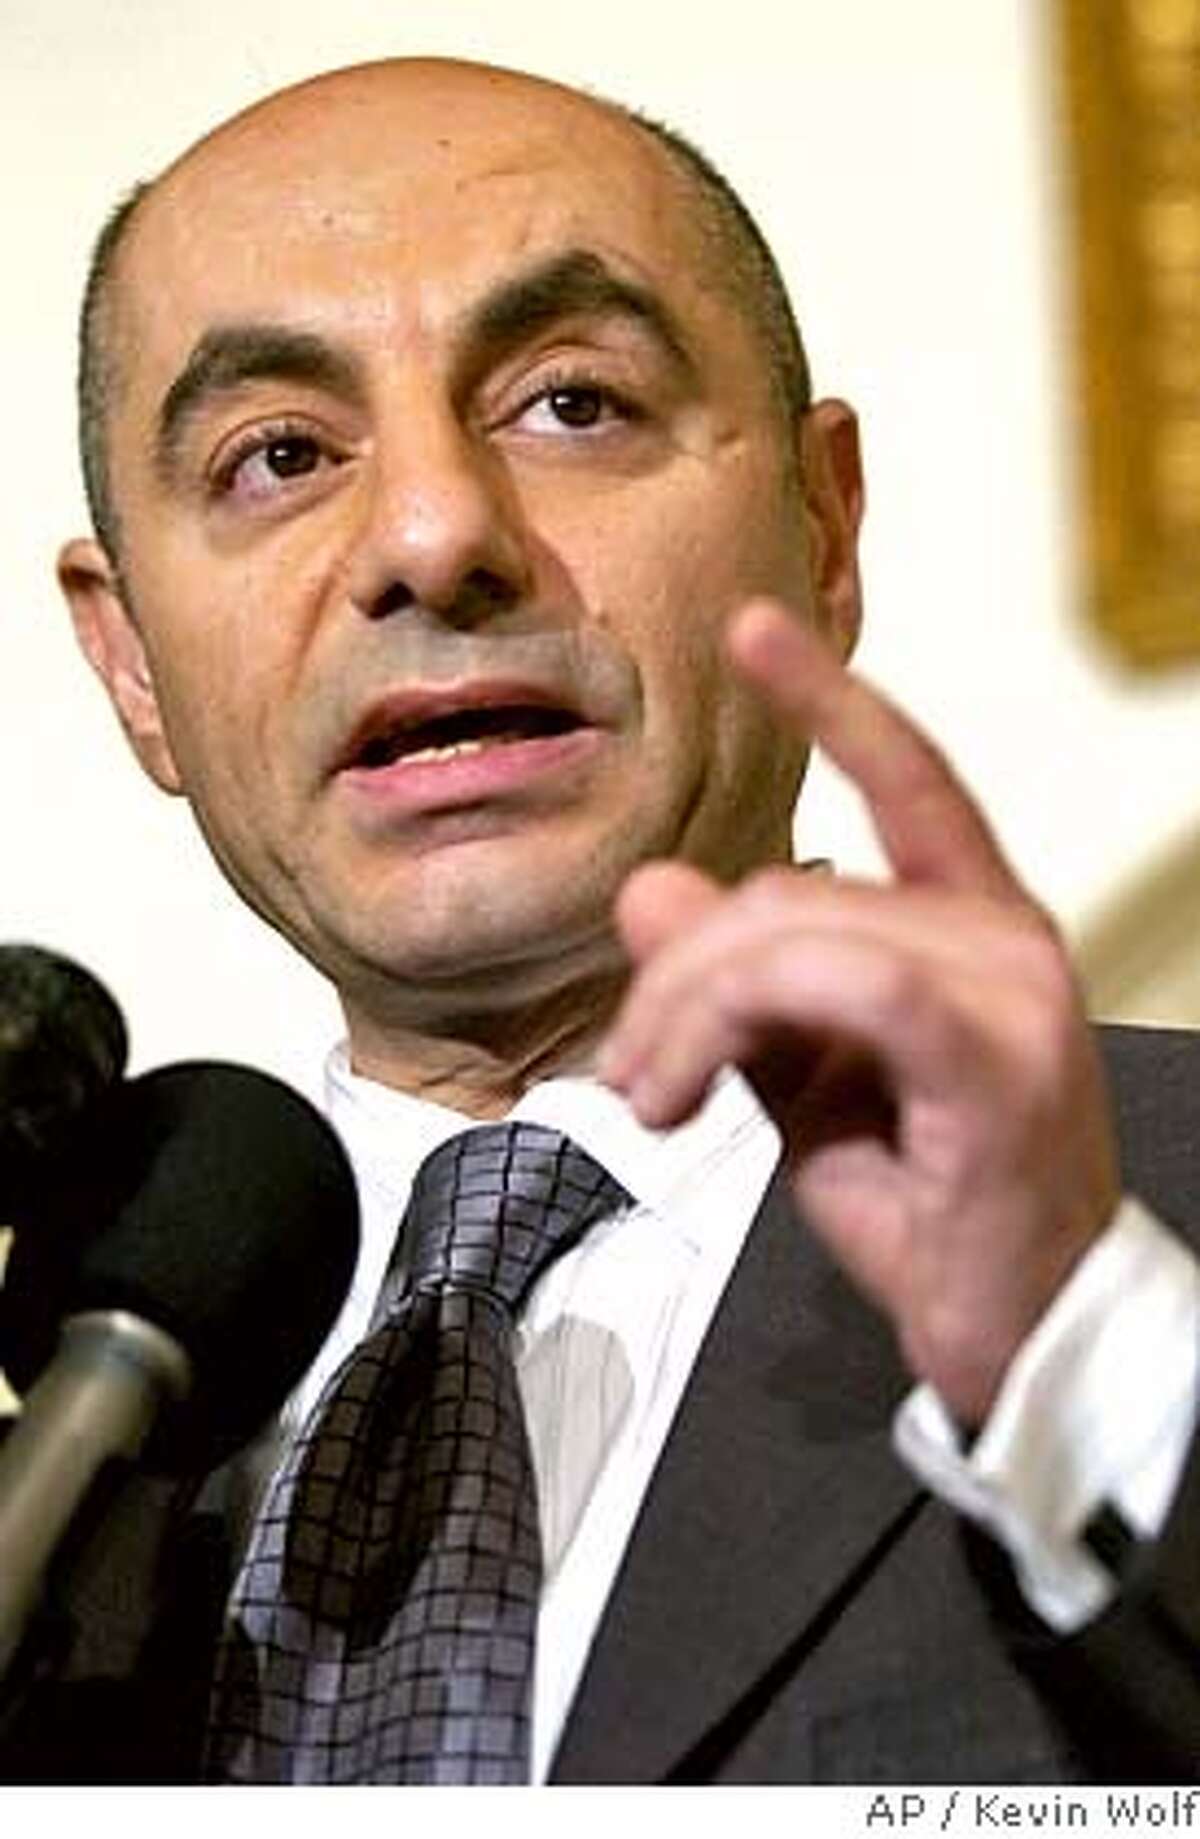 Syrian Ambassador Imad Moustapha responds to a U.N. report on Friday, Oct. 21, 2005 at the Syrian Embassy in Washington. Syria hotly dismissed on Friday a U.N. report that linked embattled President Bashar Assad's government in the assassination of a former Lebanese prime minister, as Damascus geared up to fight off growing Western sentiment to punish it with crippling economic sanctions. (AP Photo/Kevin Wolf)